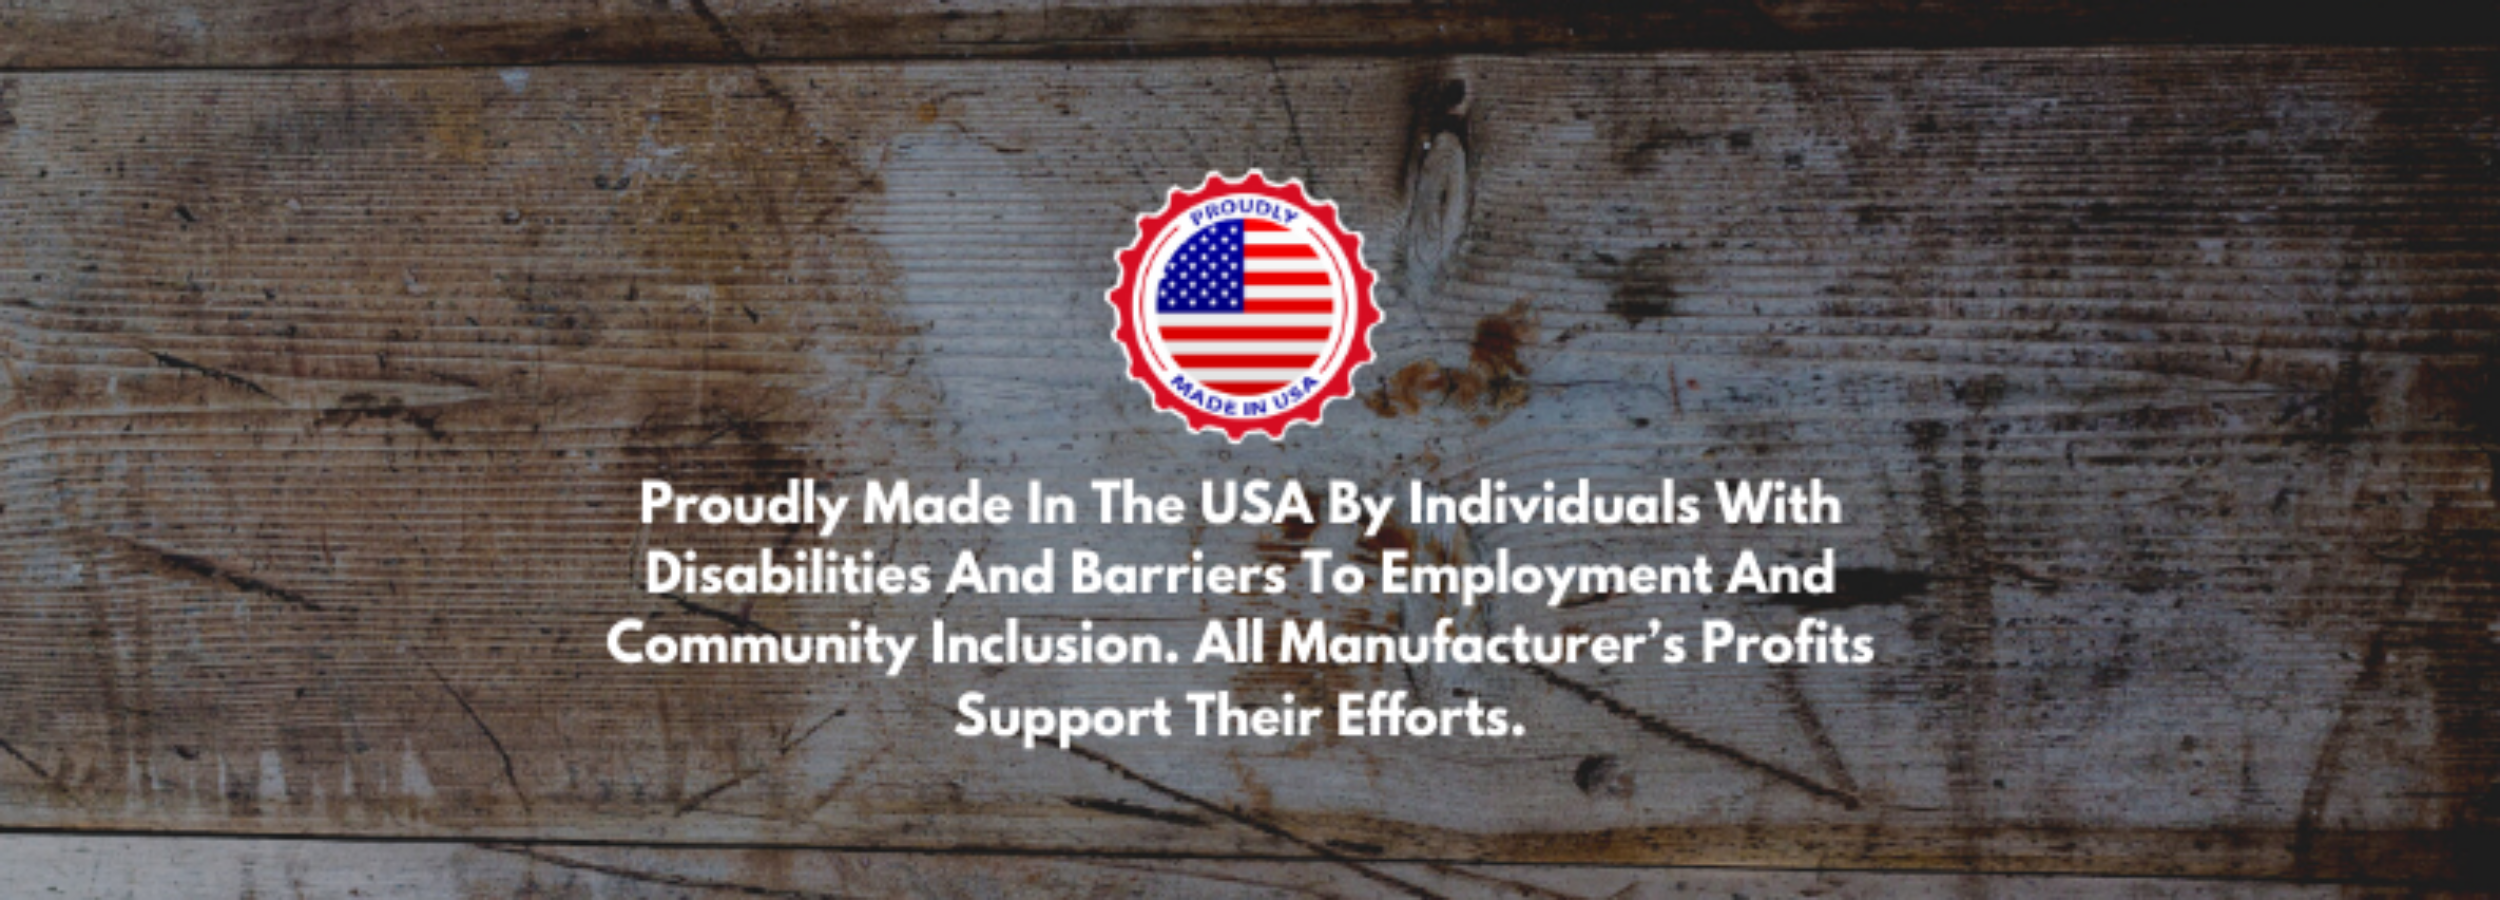 Proudly Made In The USA By Individuals With Disabilities And Barriers To Employment And Community Inclusion. All Manufacturer’s Profits Support Their Efforts. (1)